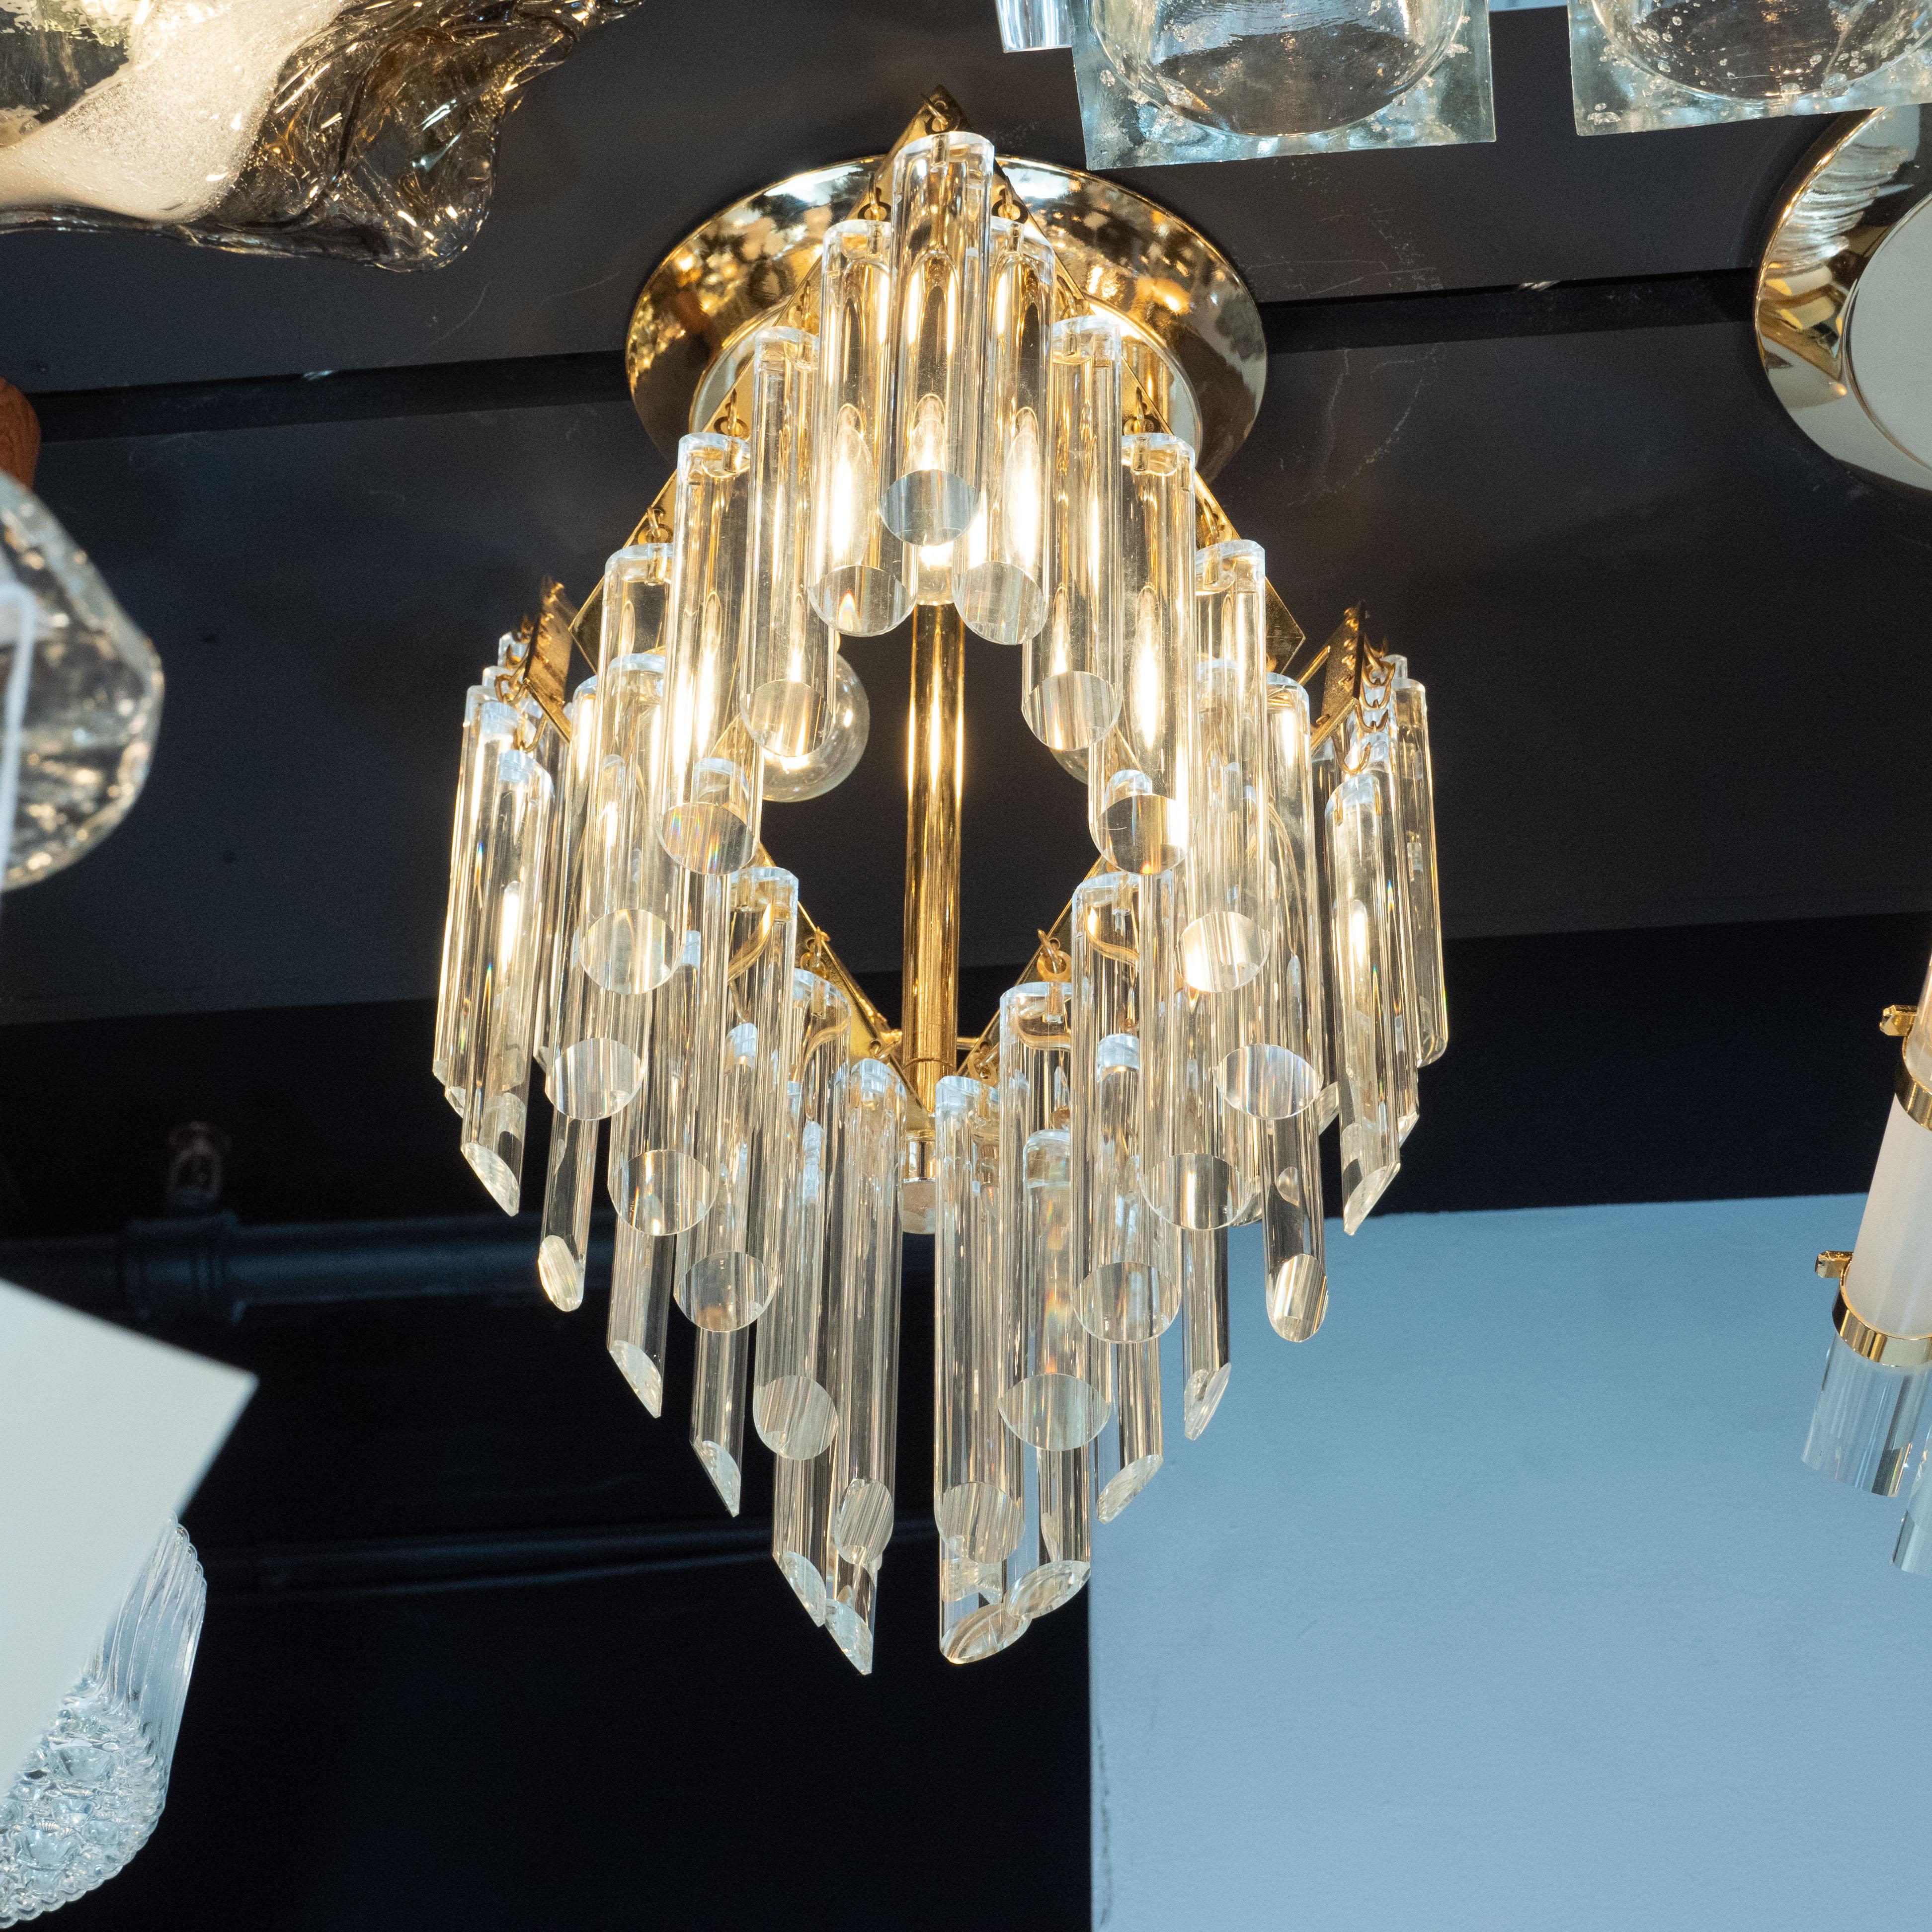 This stunning chandelier was realized by the venerable Austrian glassware company J. & L. Lobmeyr, circa 1970. The fixture hangs from a circular stepped base and consists of a central brass rod to which three upward-tilting, diamond-shaped brass